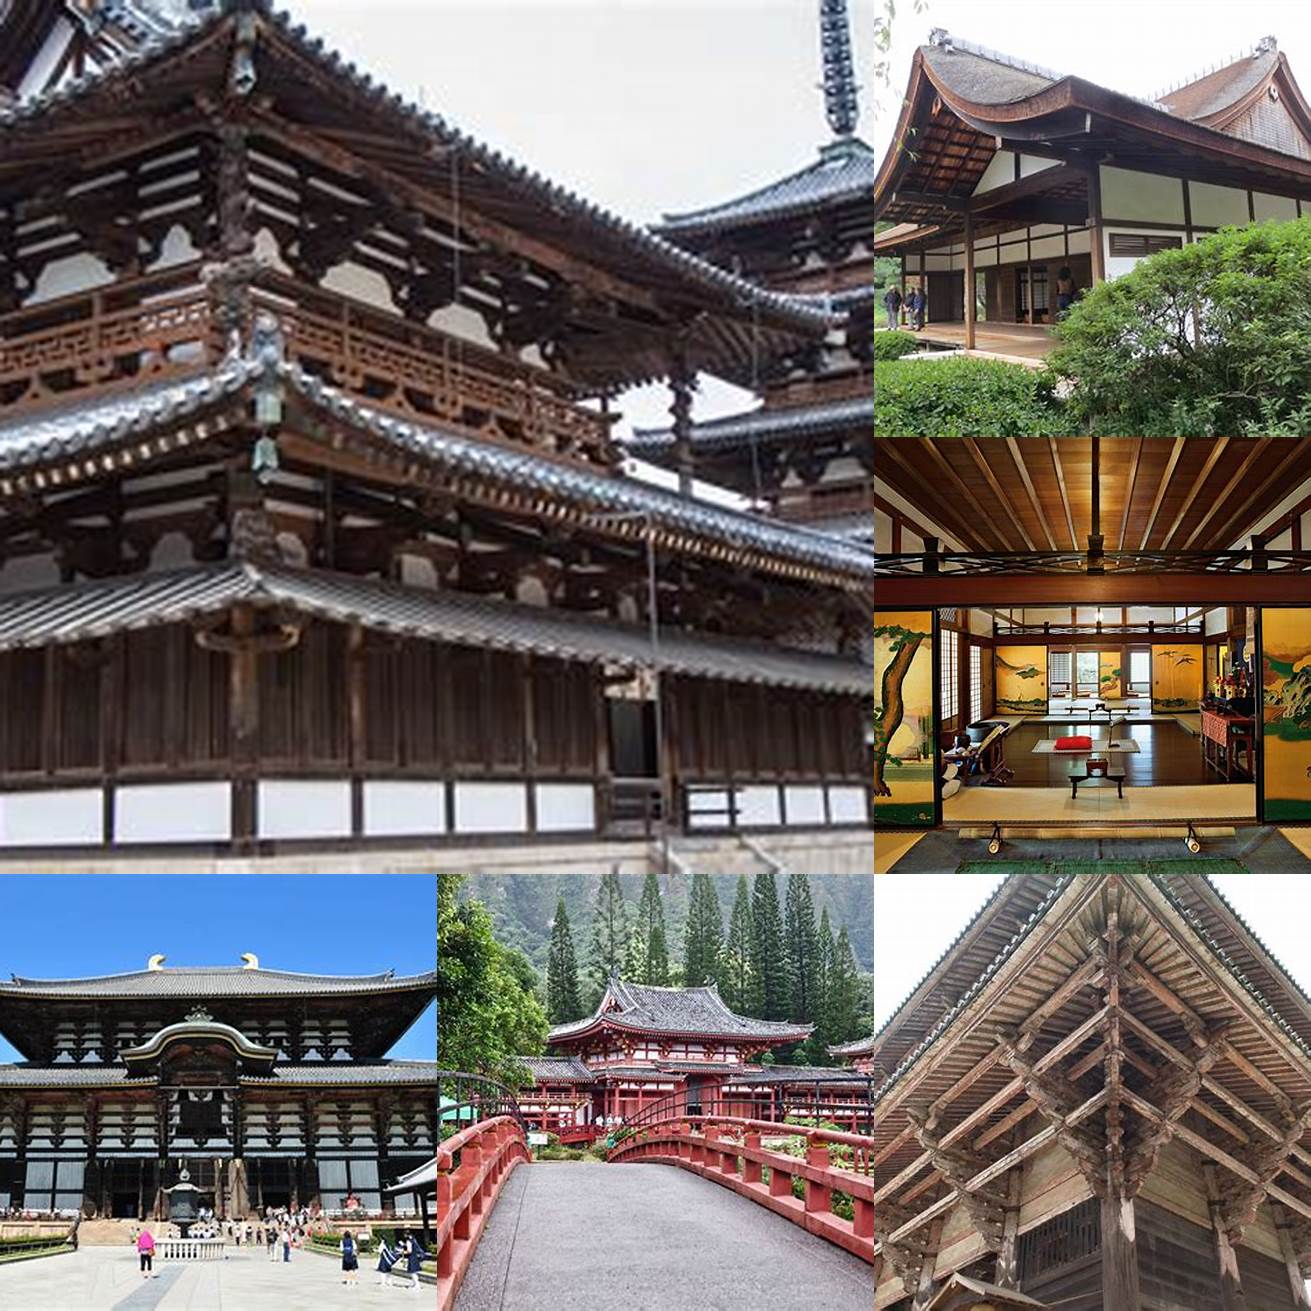 Traditional wooden temple in Japan